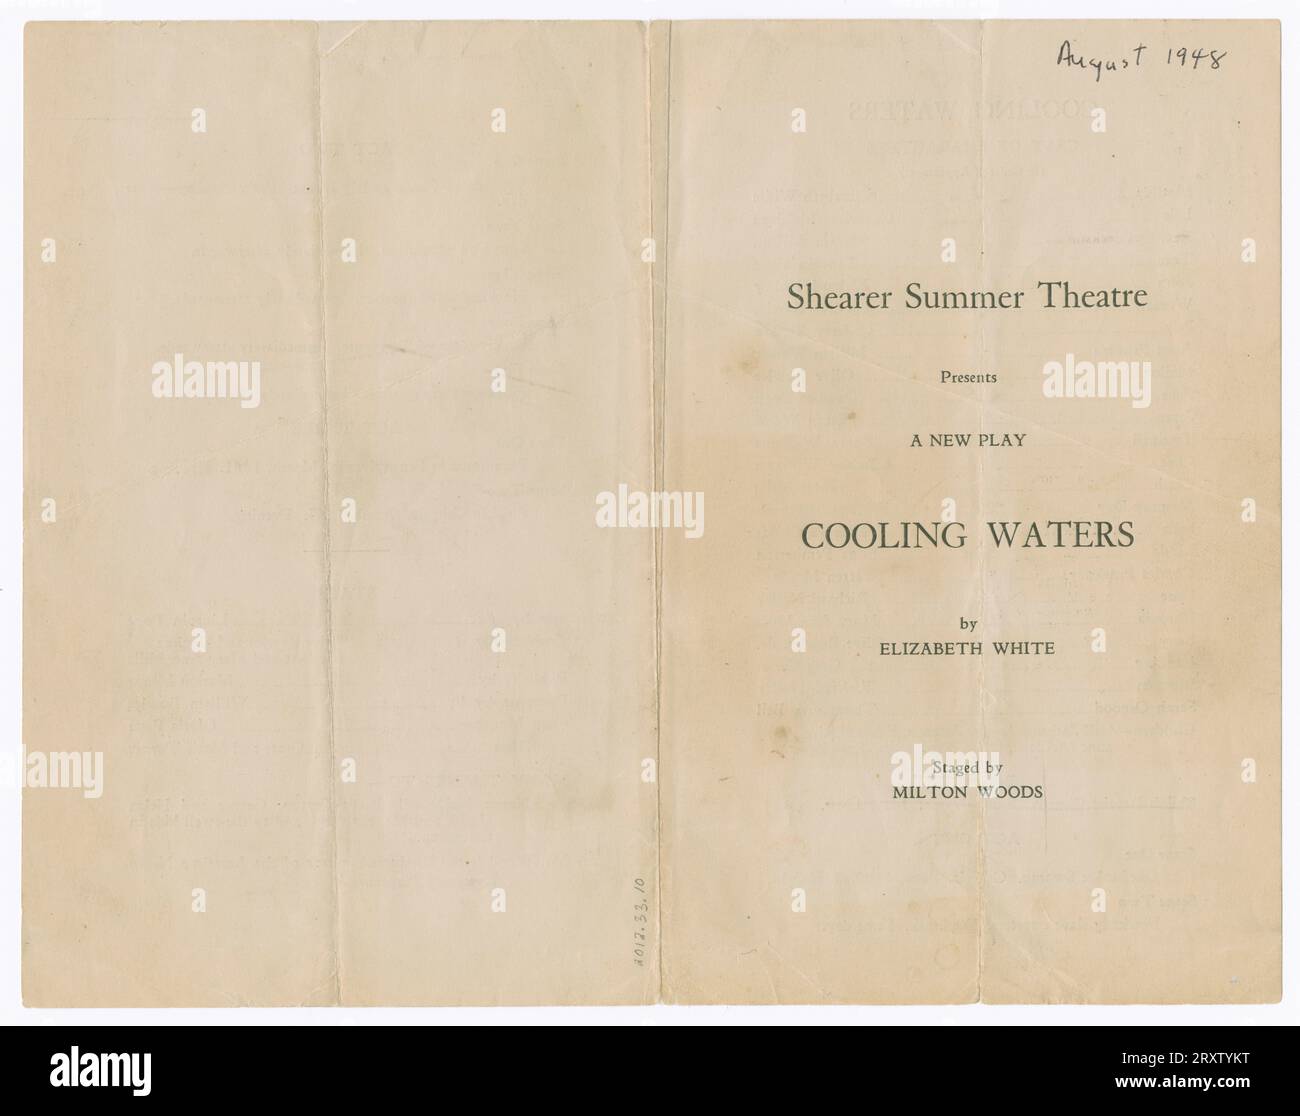 A program for the play 'Cooling Waters' by Liz White. The program is yellowed and has an assortment of creases and tears. Stock Photo